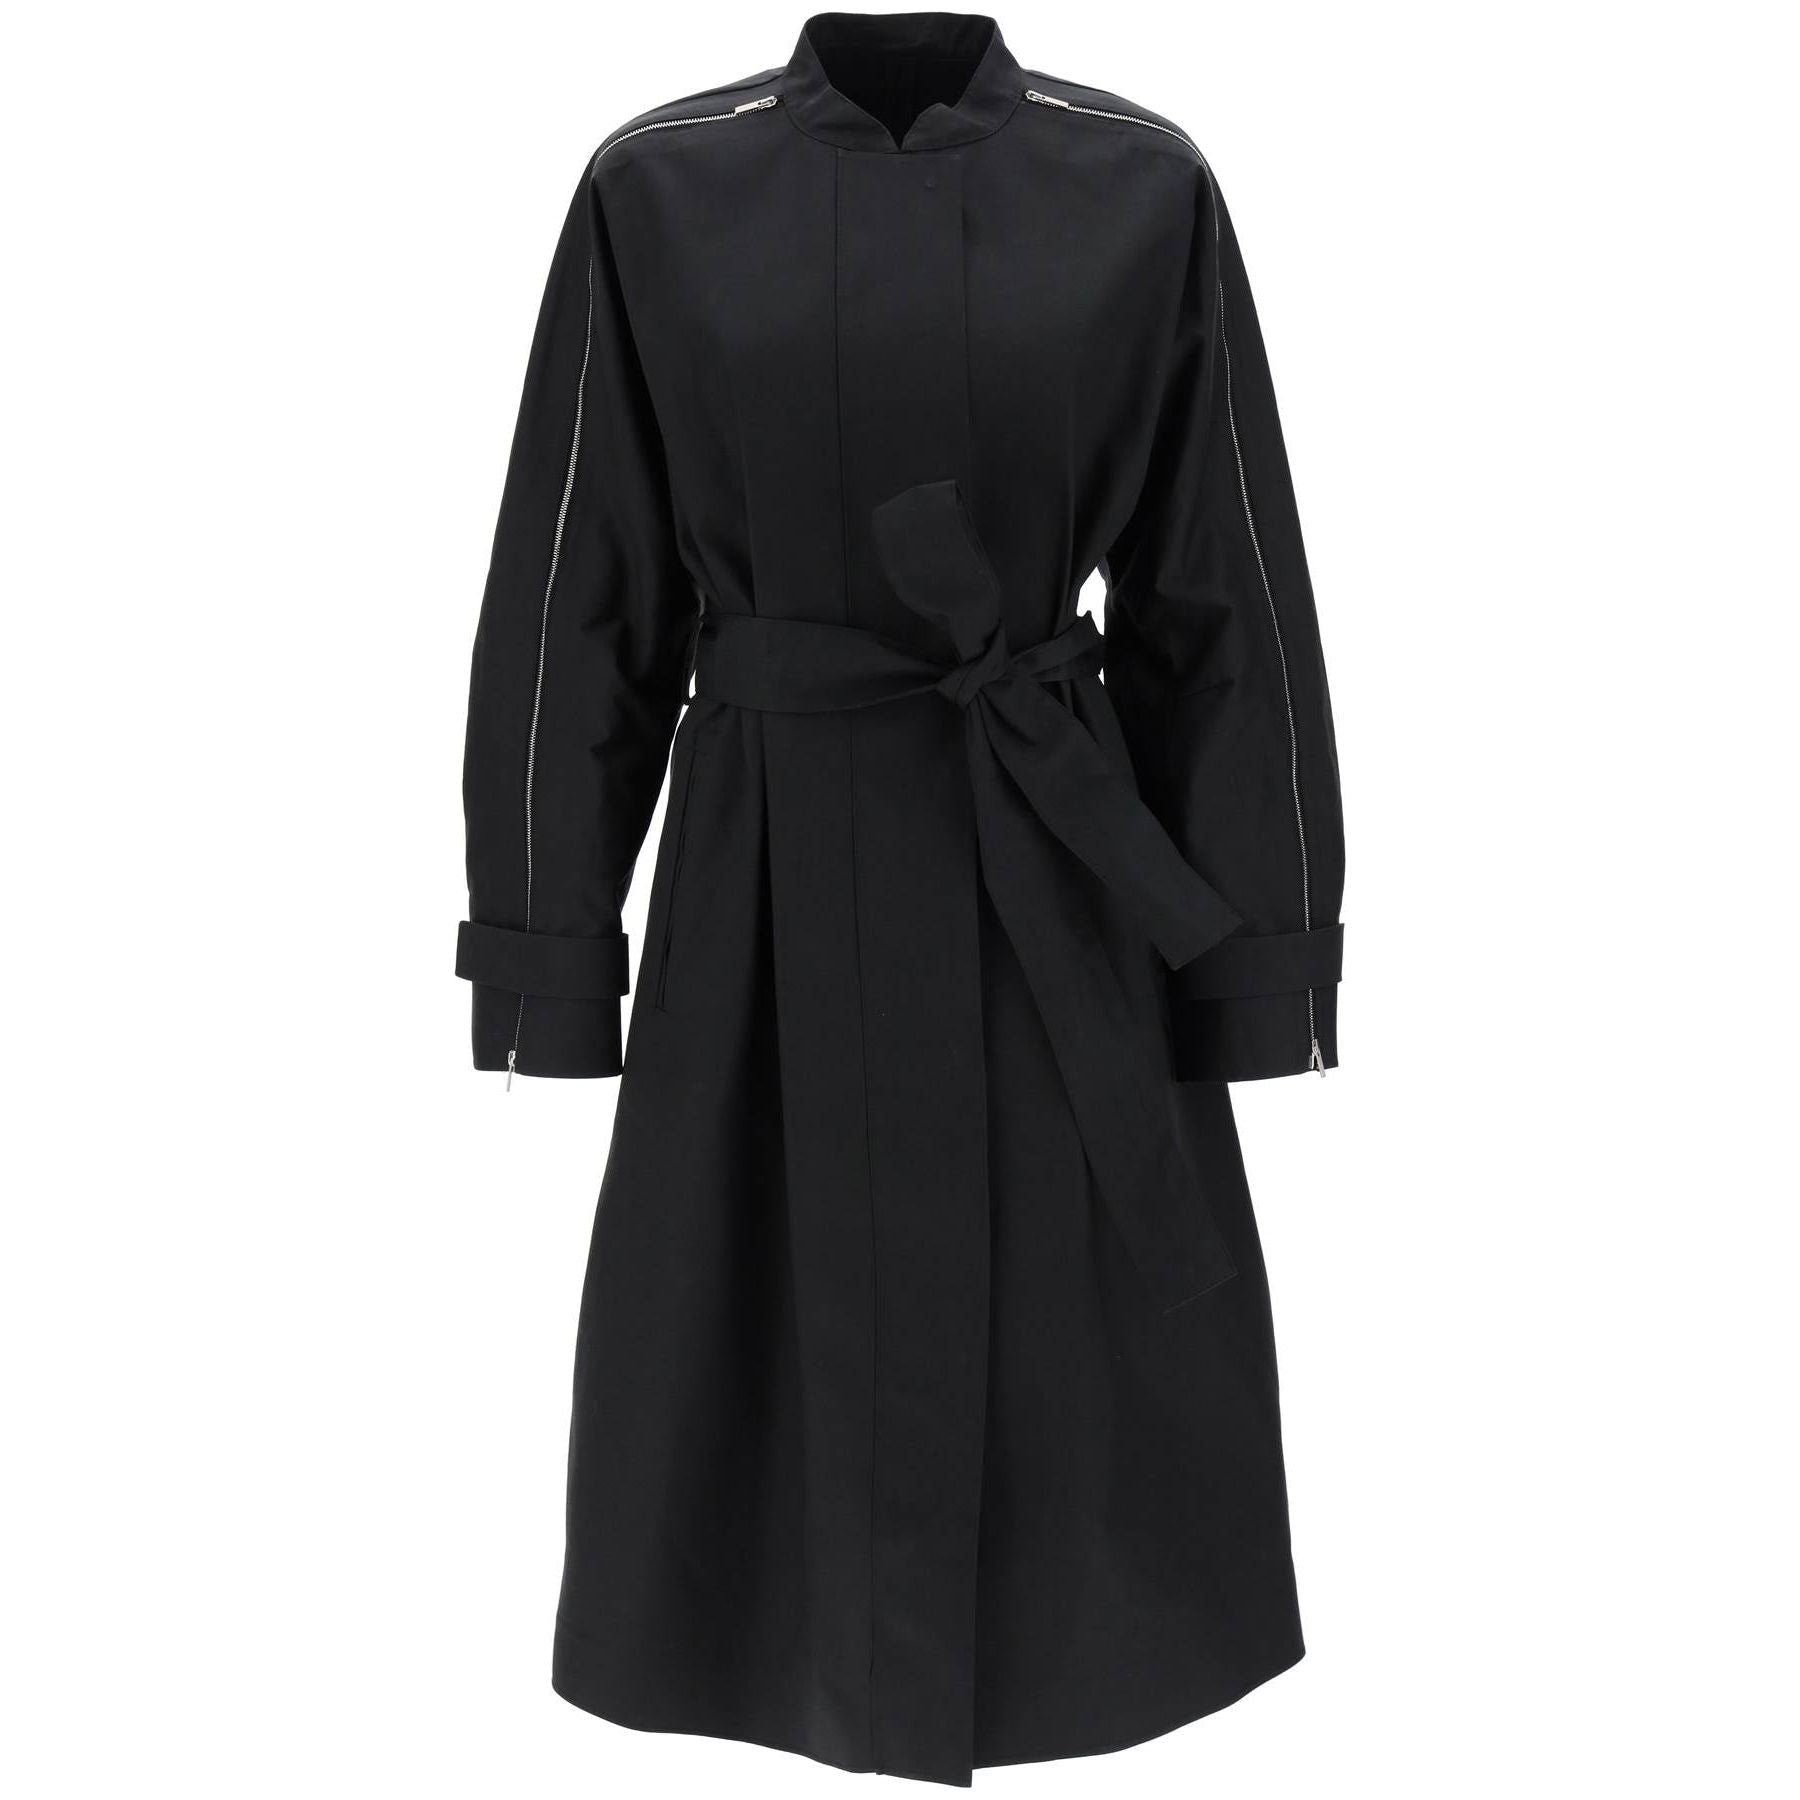 Poplin Trench Coat With Contrasting Inserts